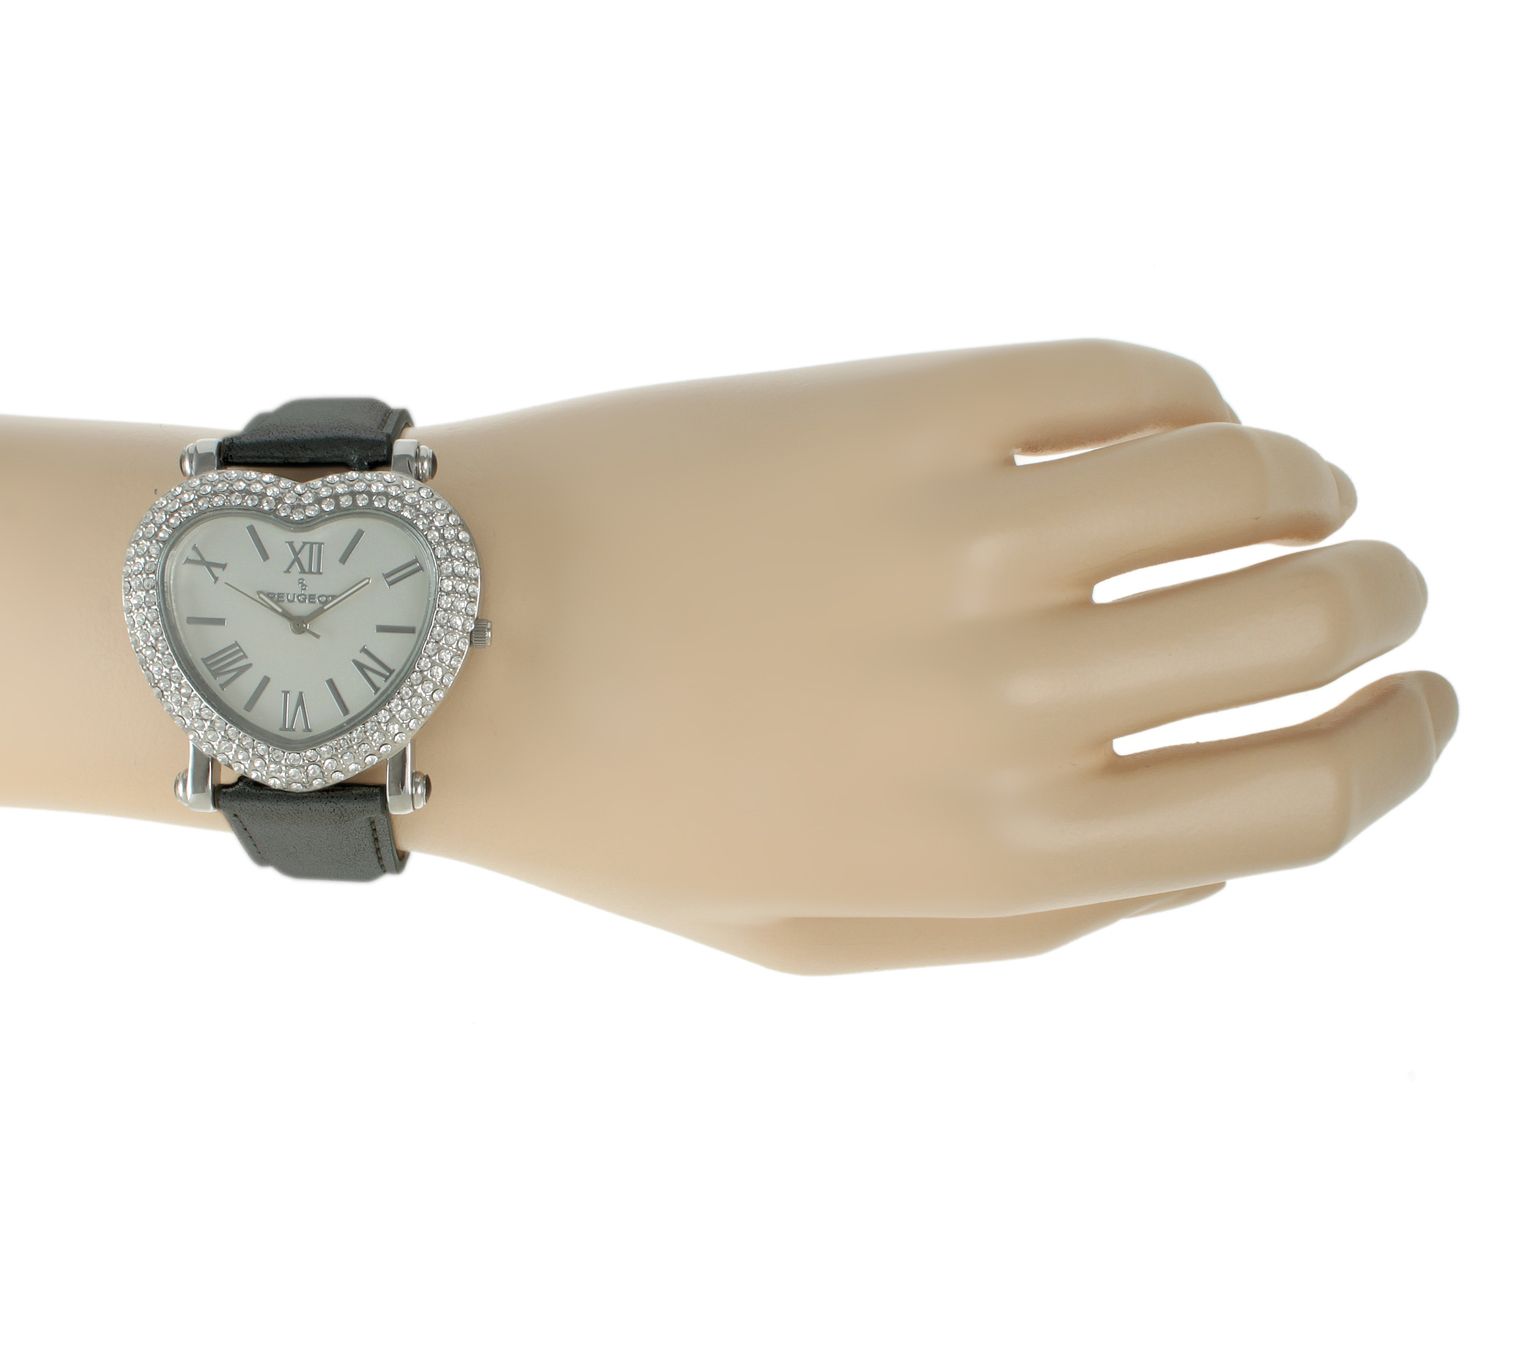 Peugeot Women's Stainless Heart-Shaped CrystalLeather Watch - QVC.com